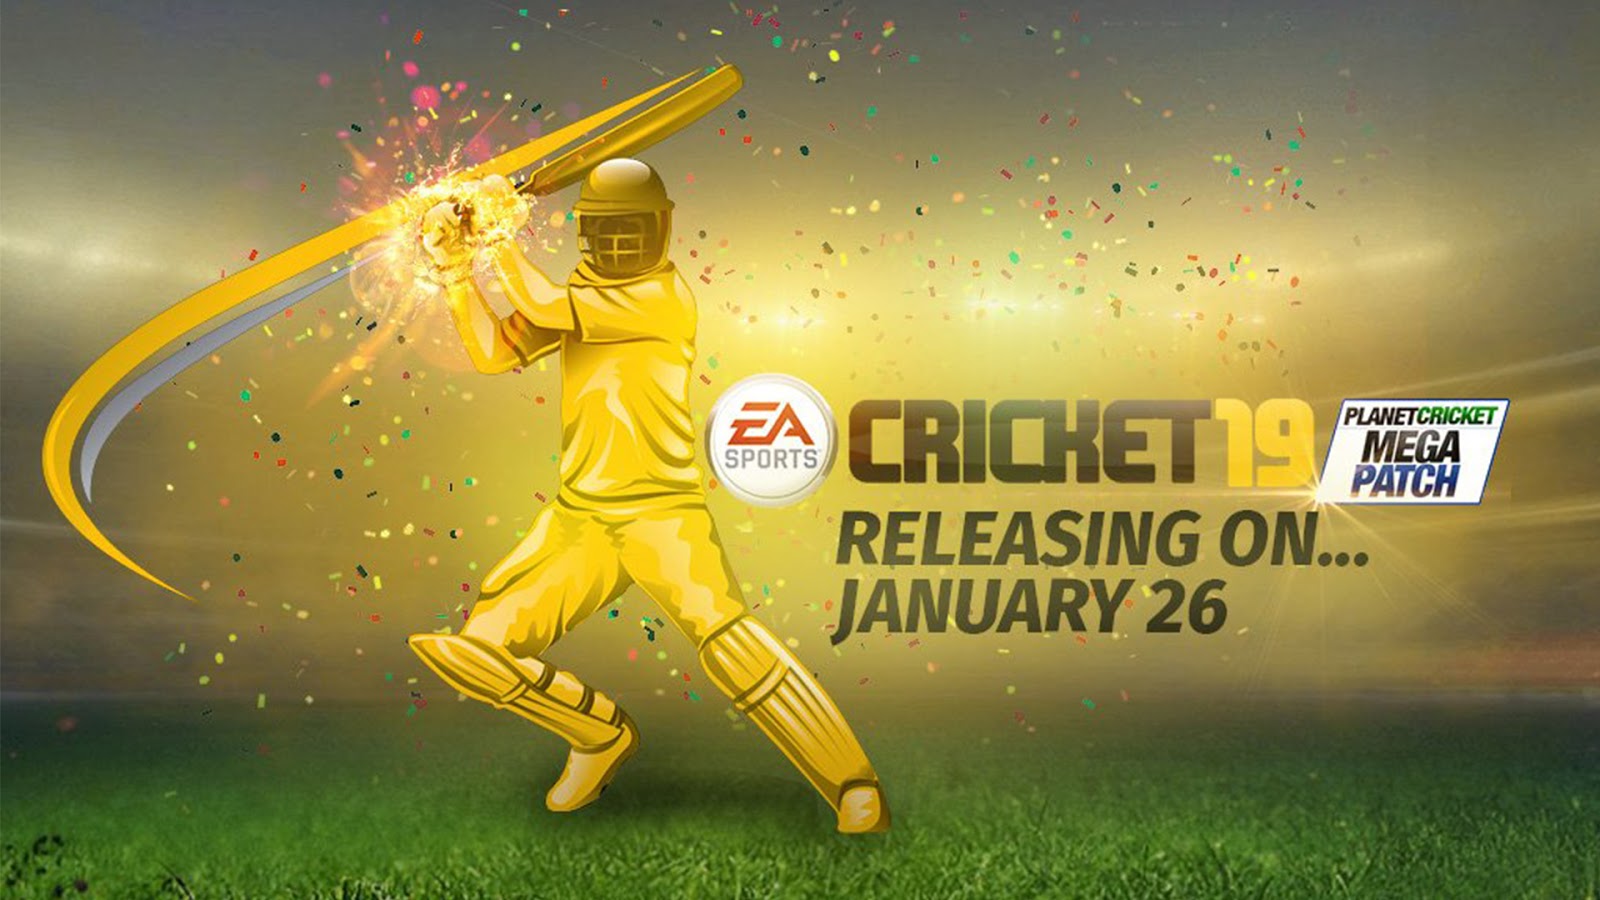 ea cricket games free download for pc full version